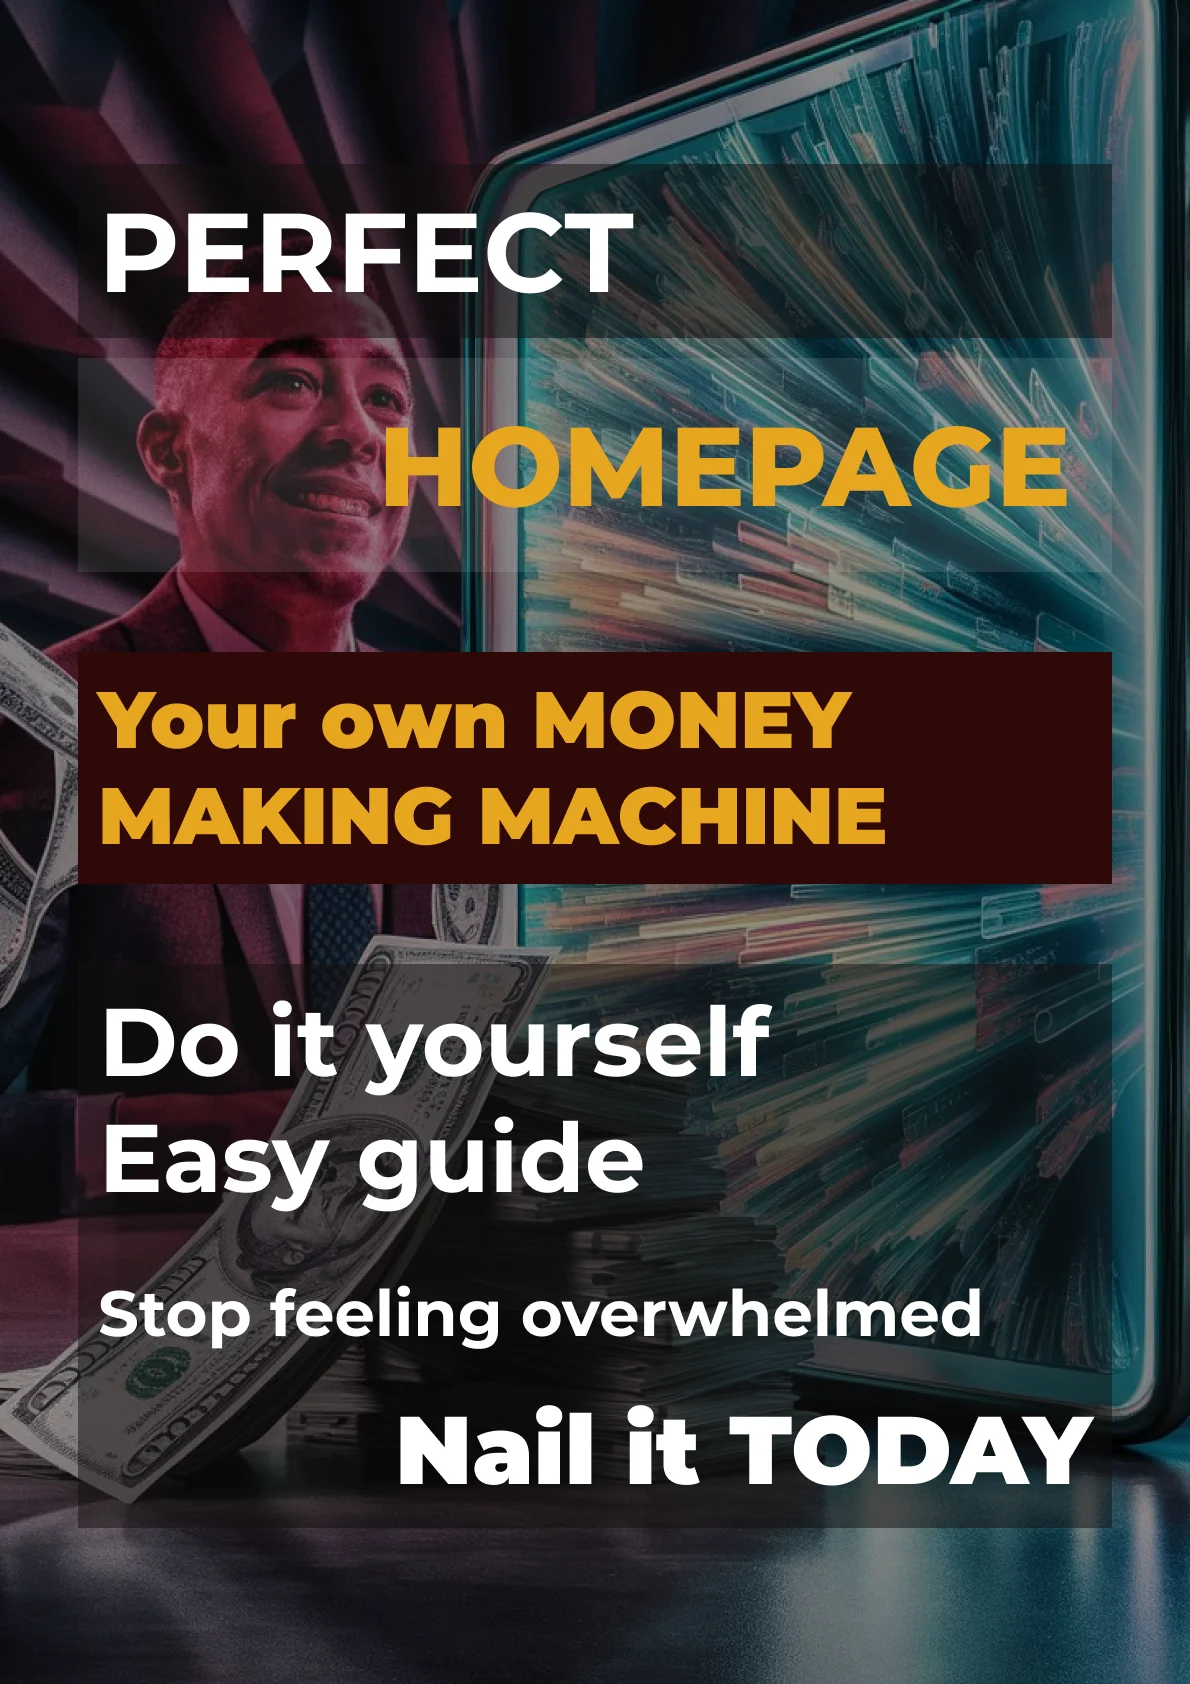 How to make the perfect HOMEPAGE